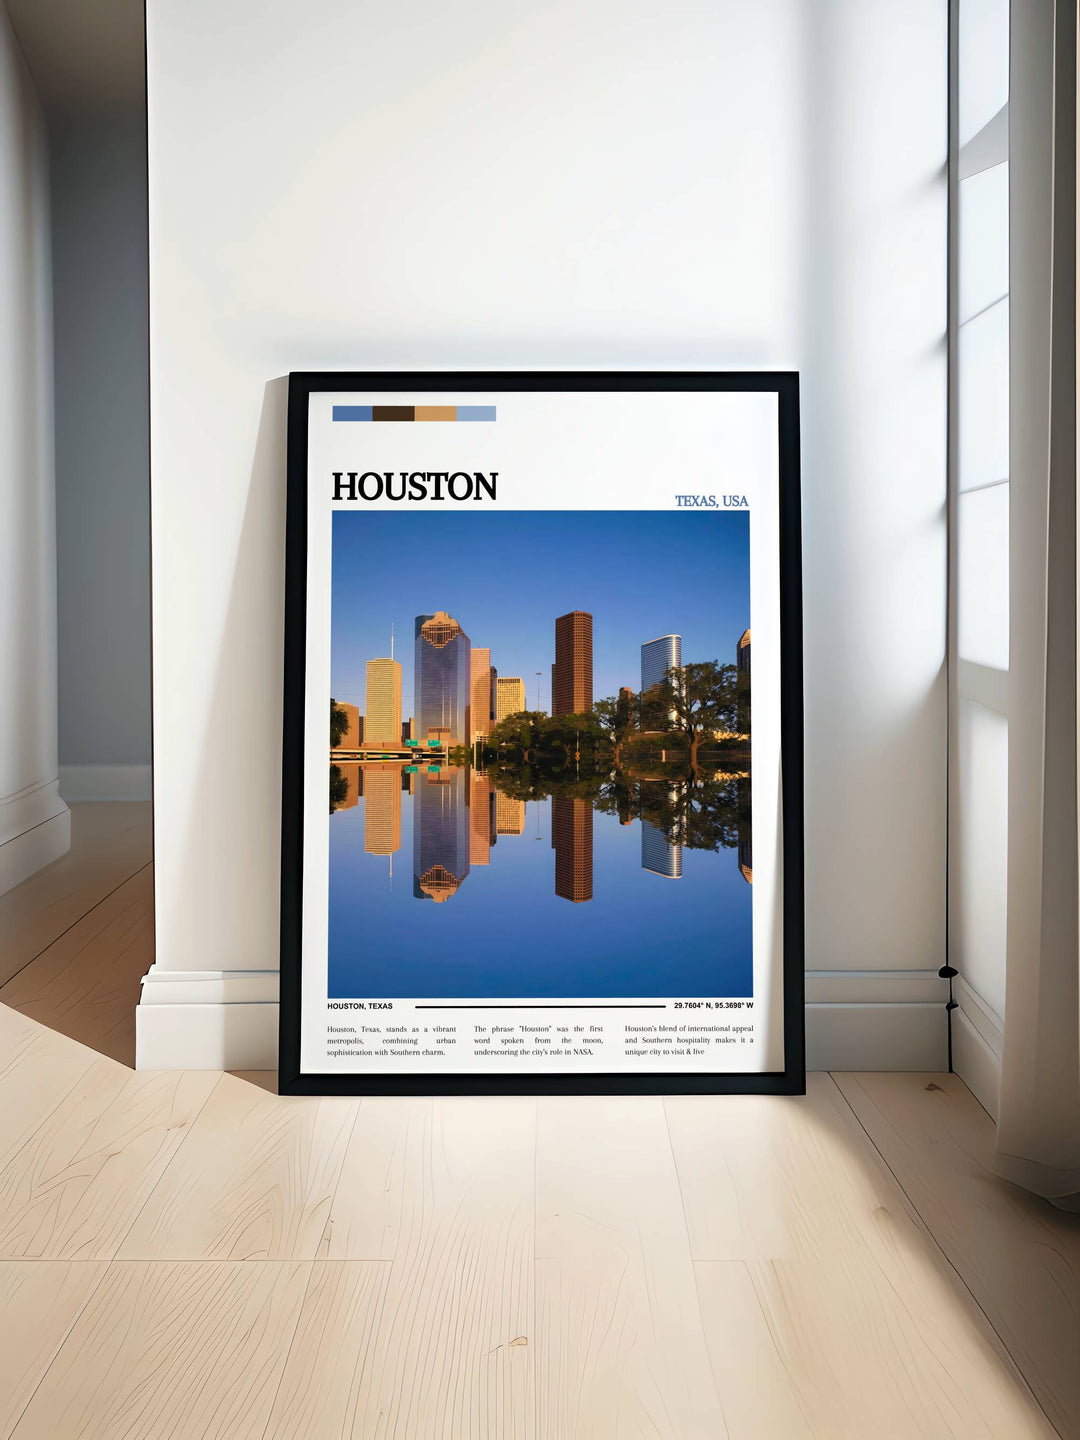 Panoramic Houston skyline poster with a wide view from Buffalo Bayou, showing the reflection of skyscrapers in the water, rendered in sharp, realistic details.